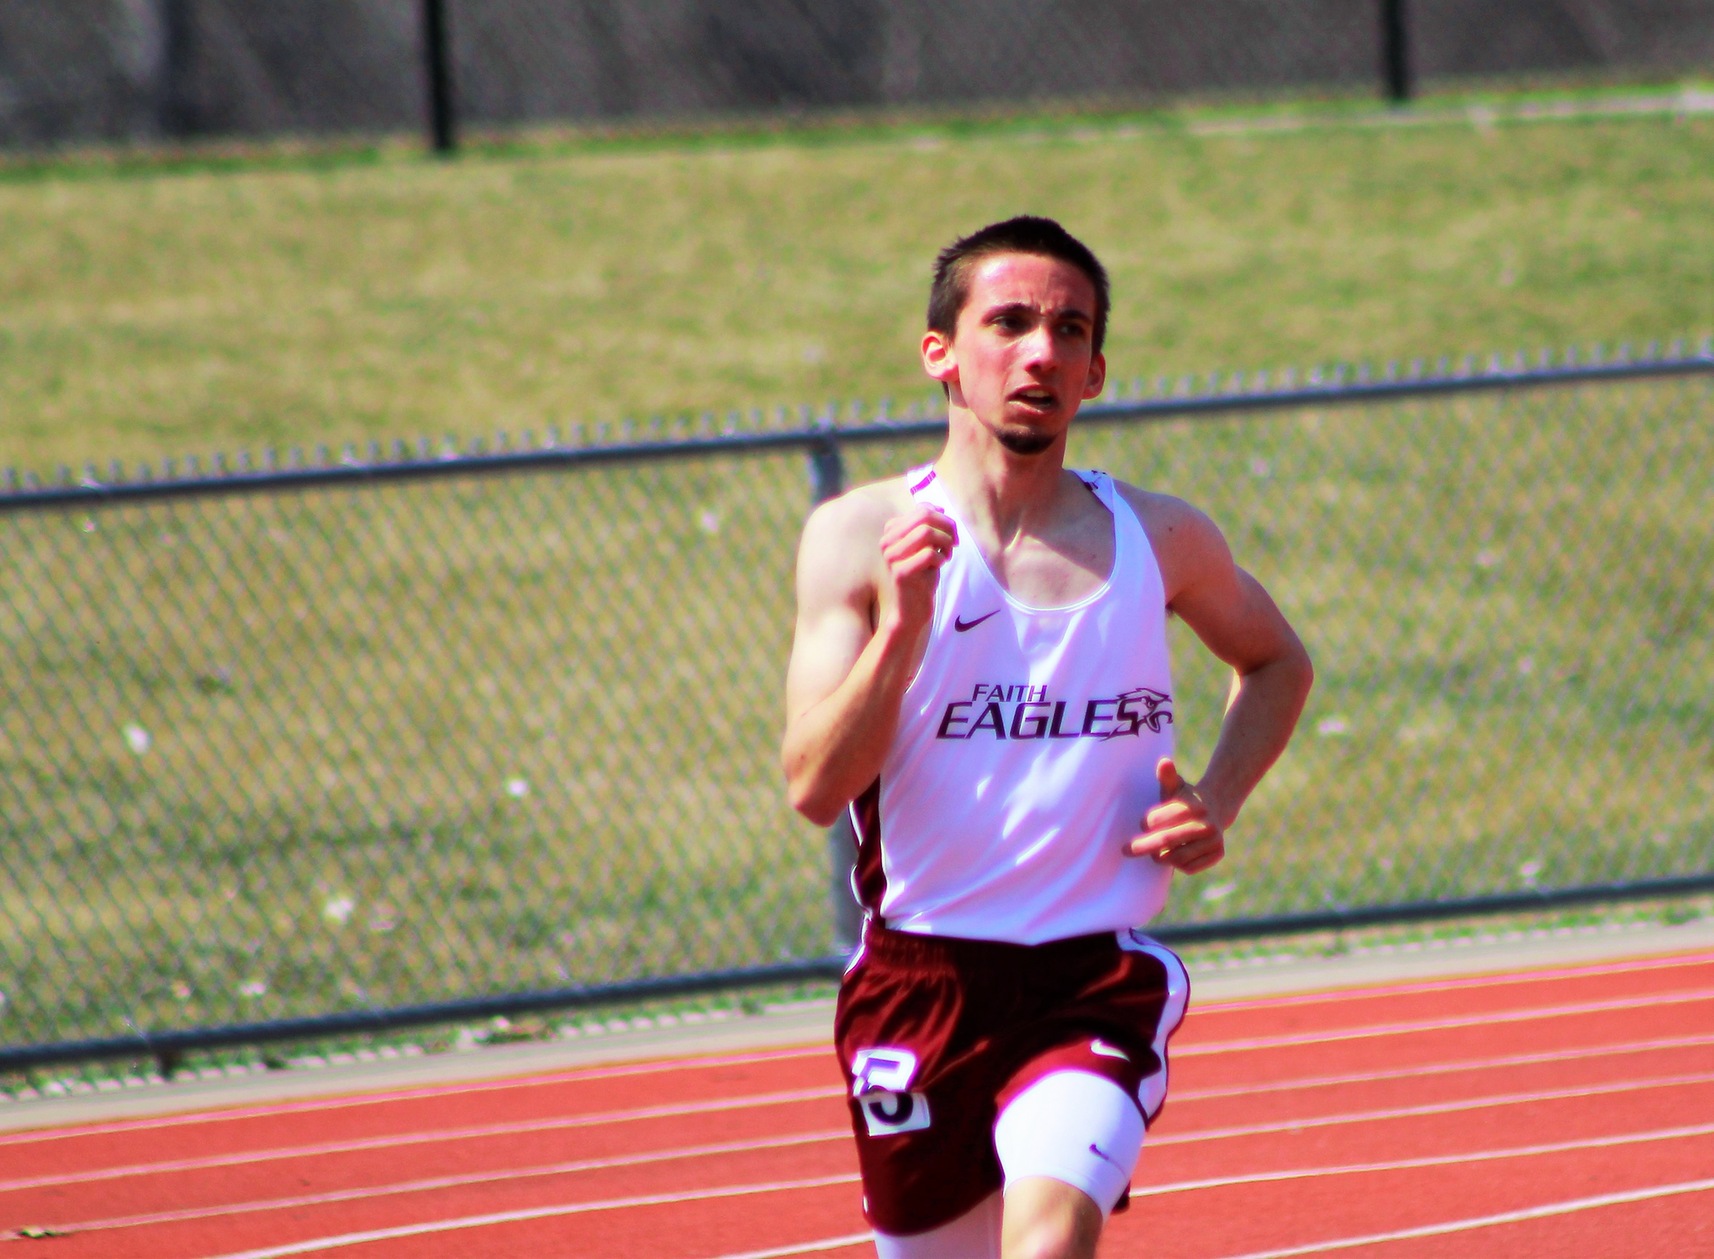 Ryan Hughes set a new personal best time of 2:11:87 in the 800m run